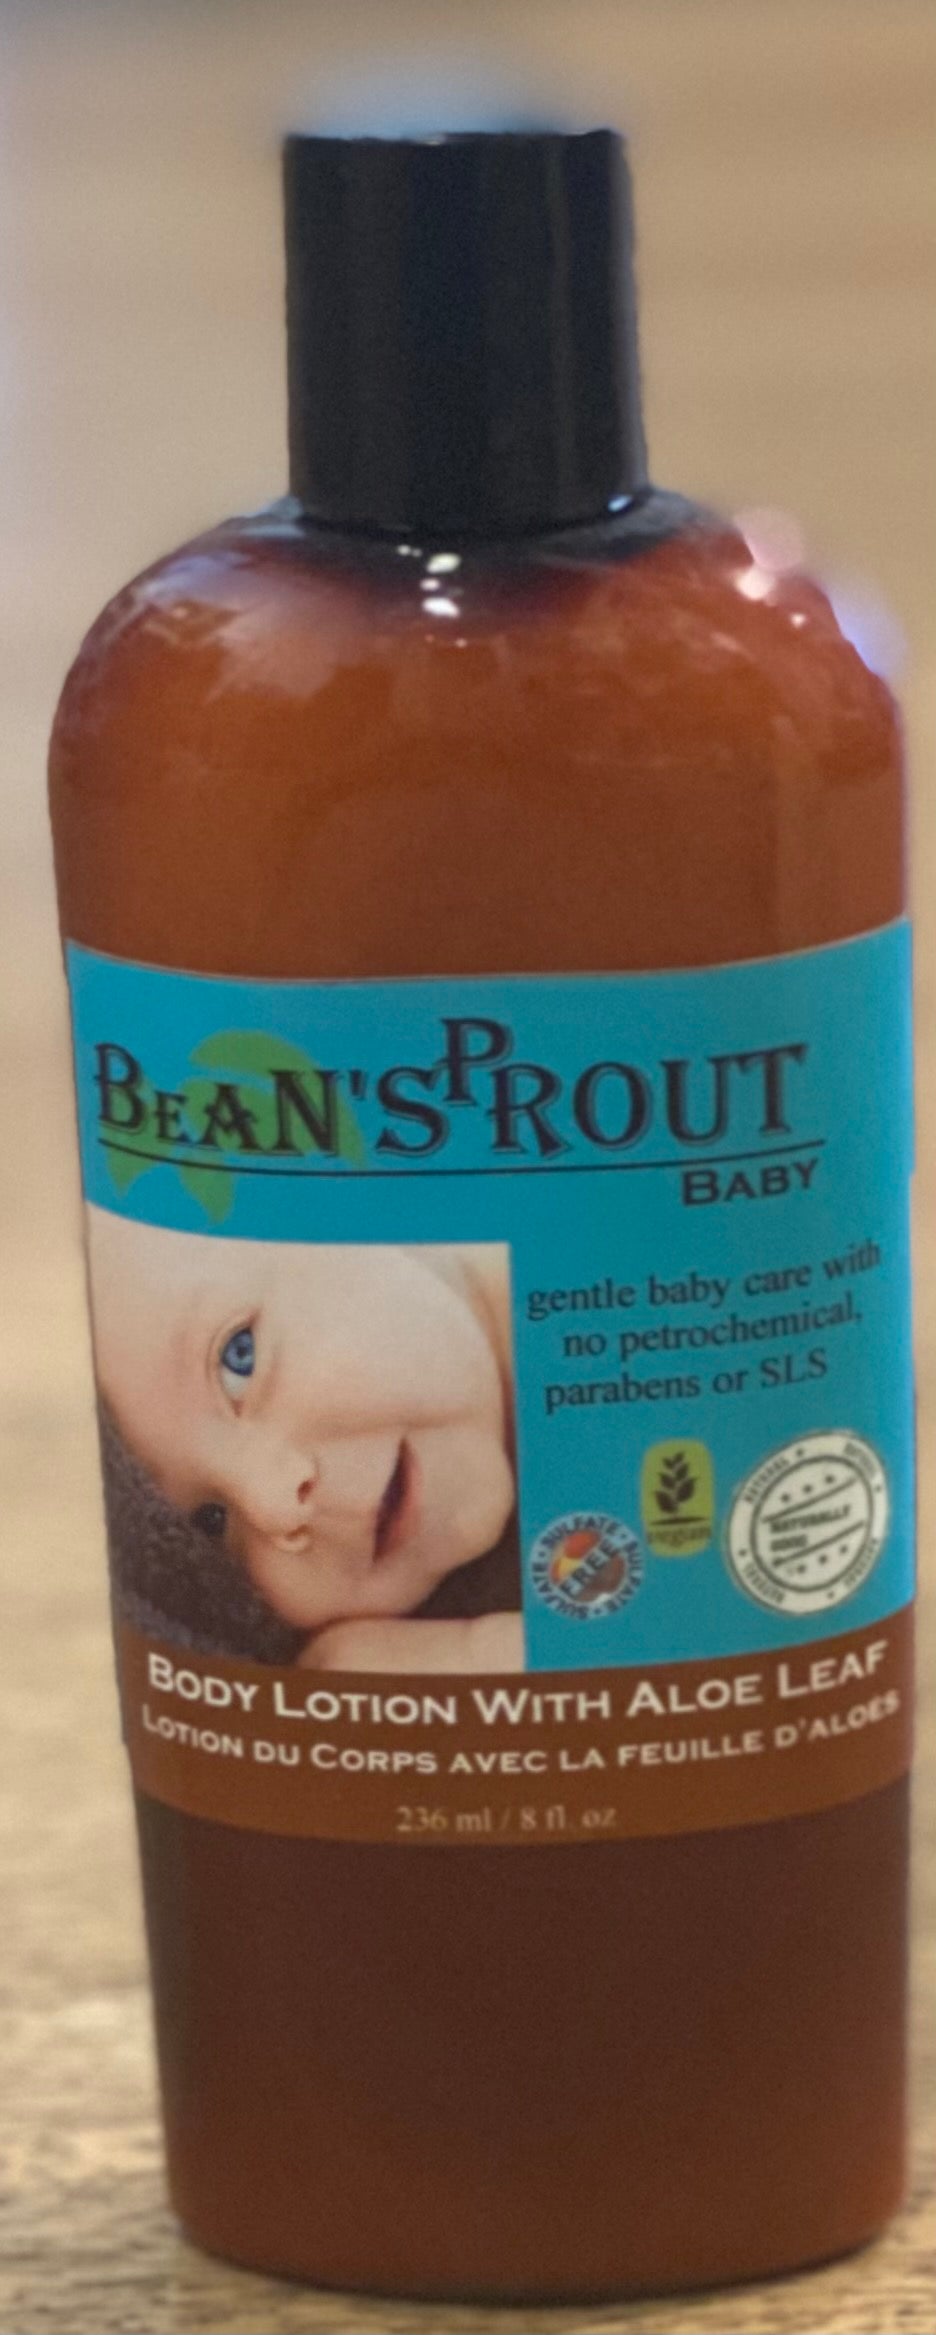 Bean'Sprout Baby Body Lotion with Aloe Leaf